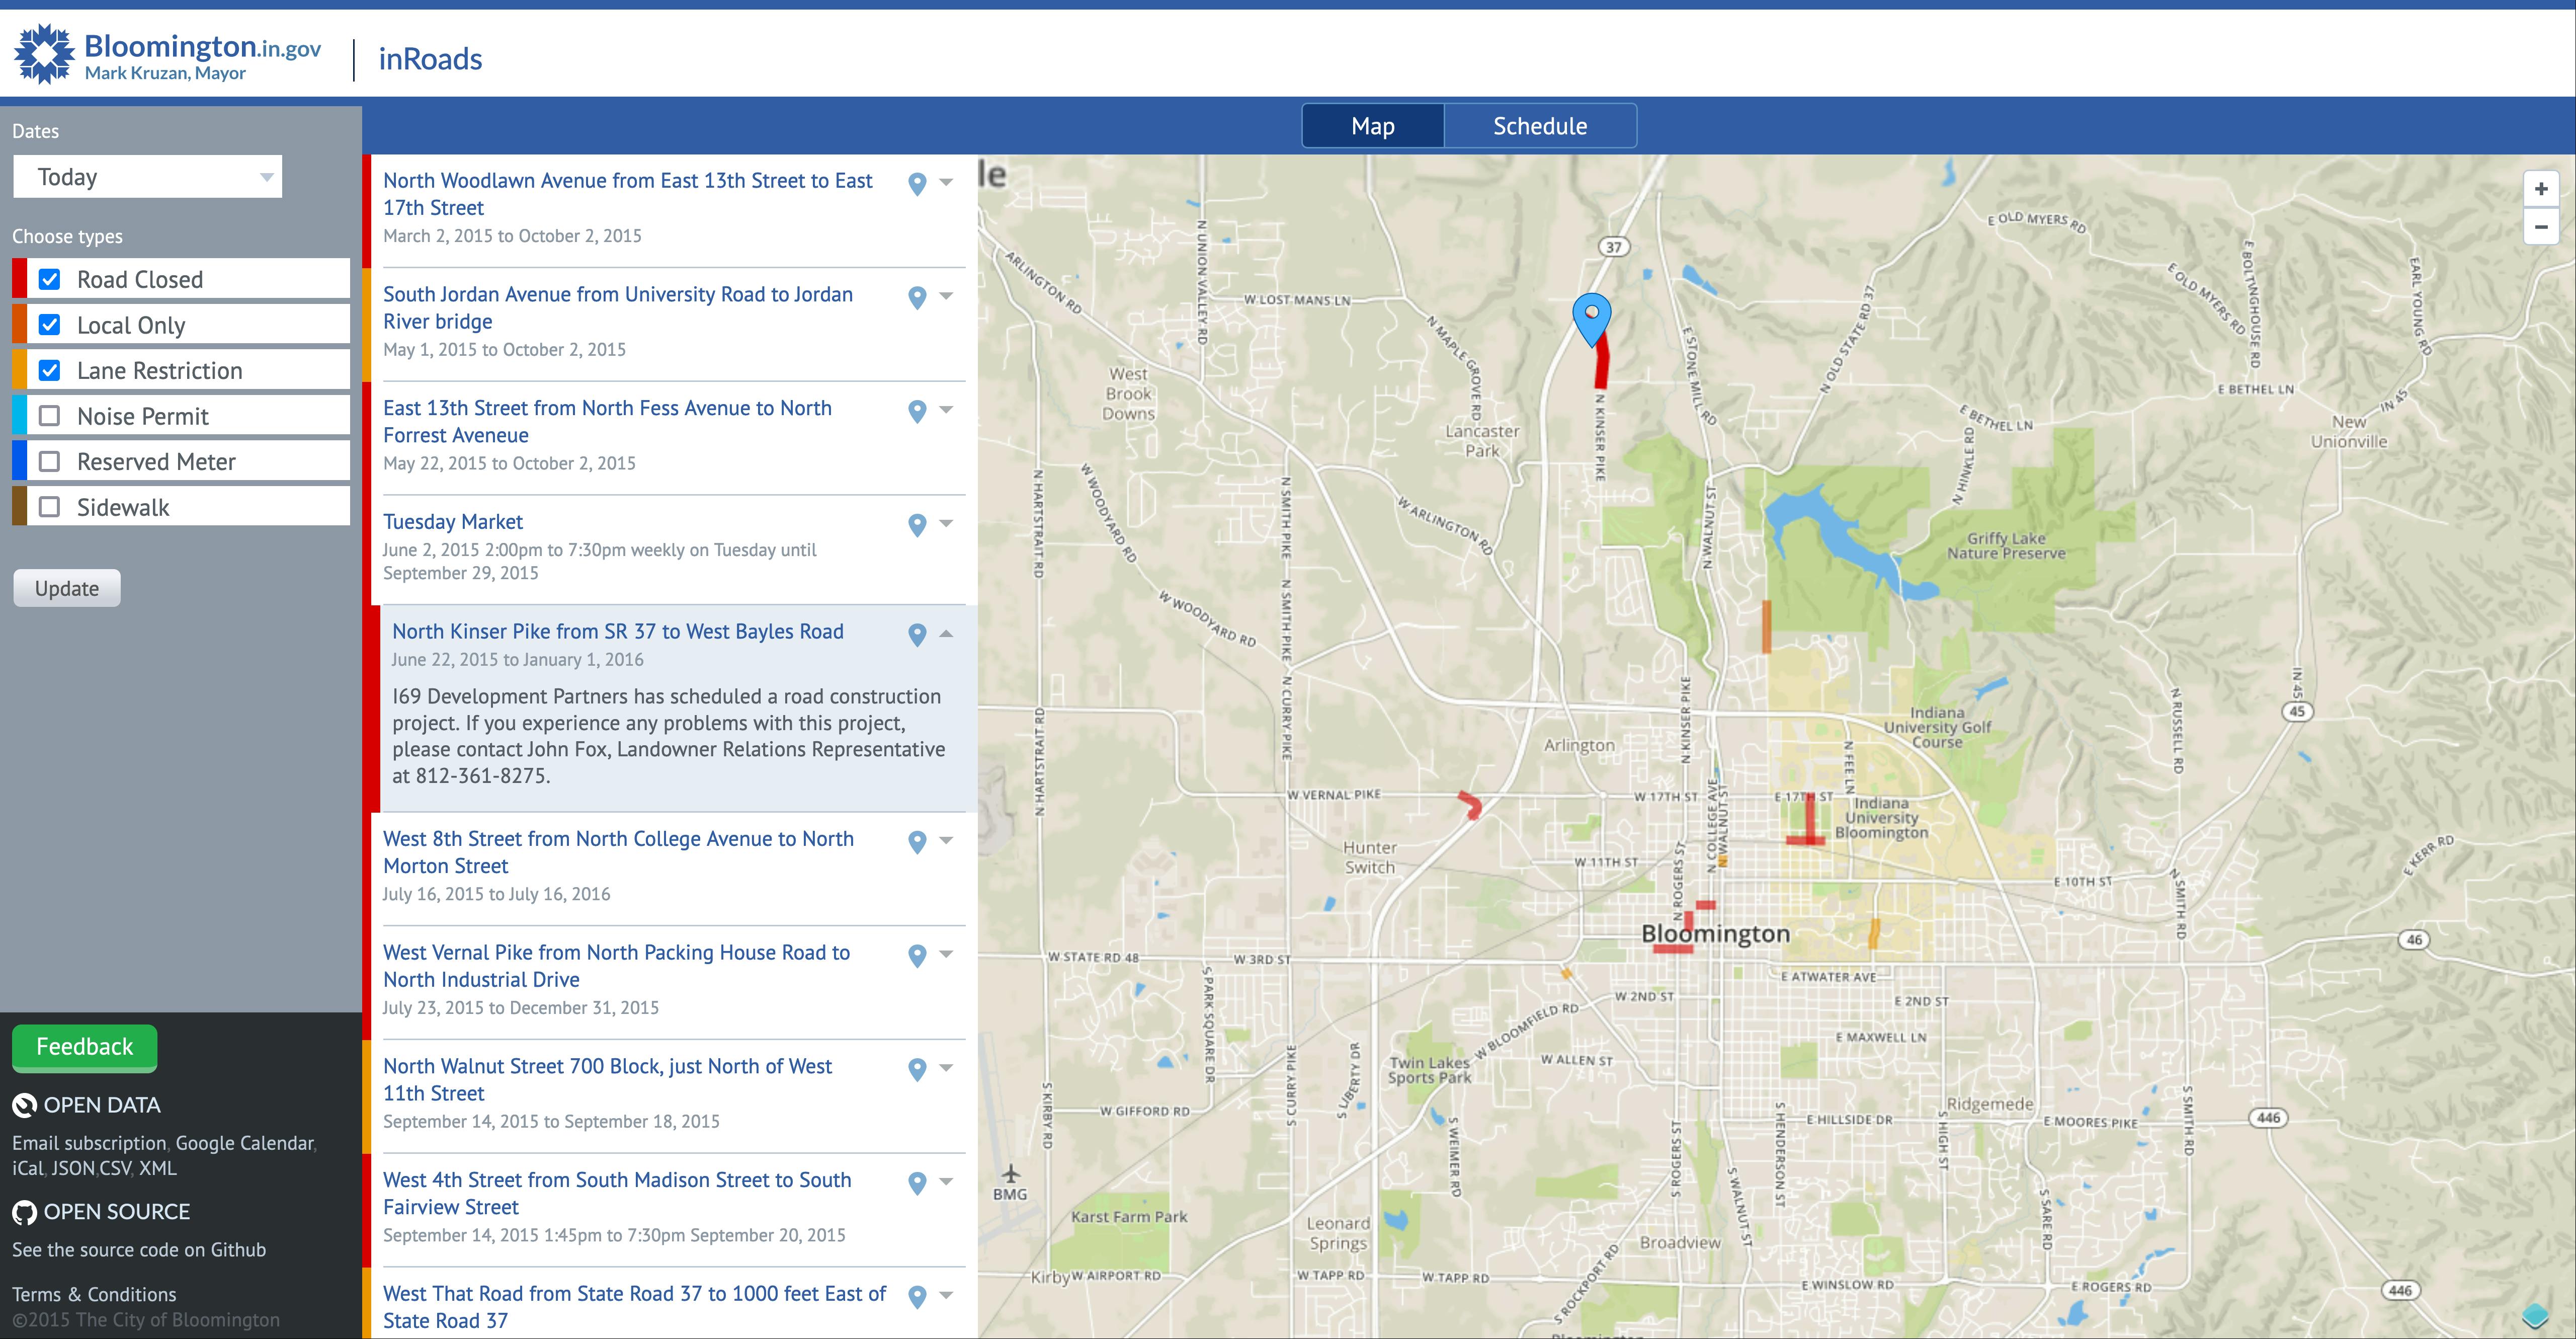 A screen shot of a web app, with a filters panel, a listing of road closures, and a map.